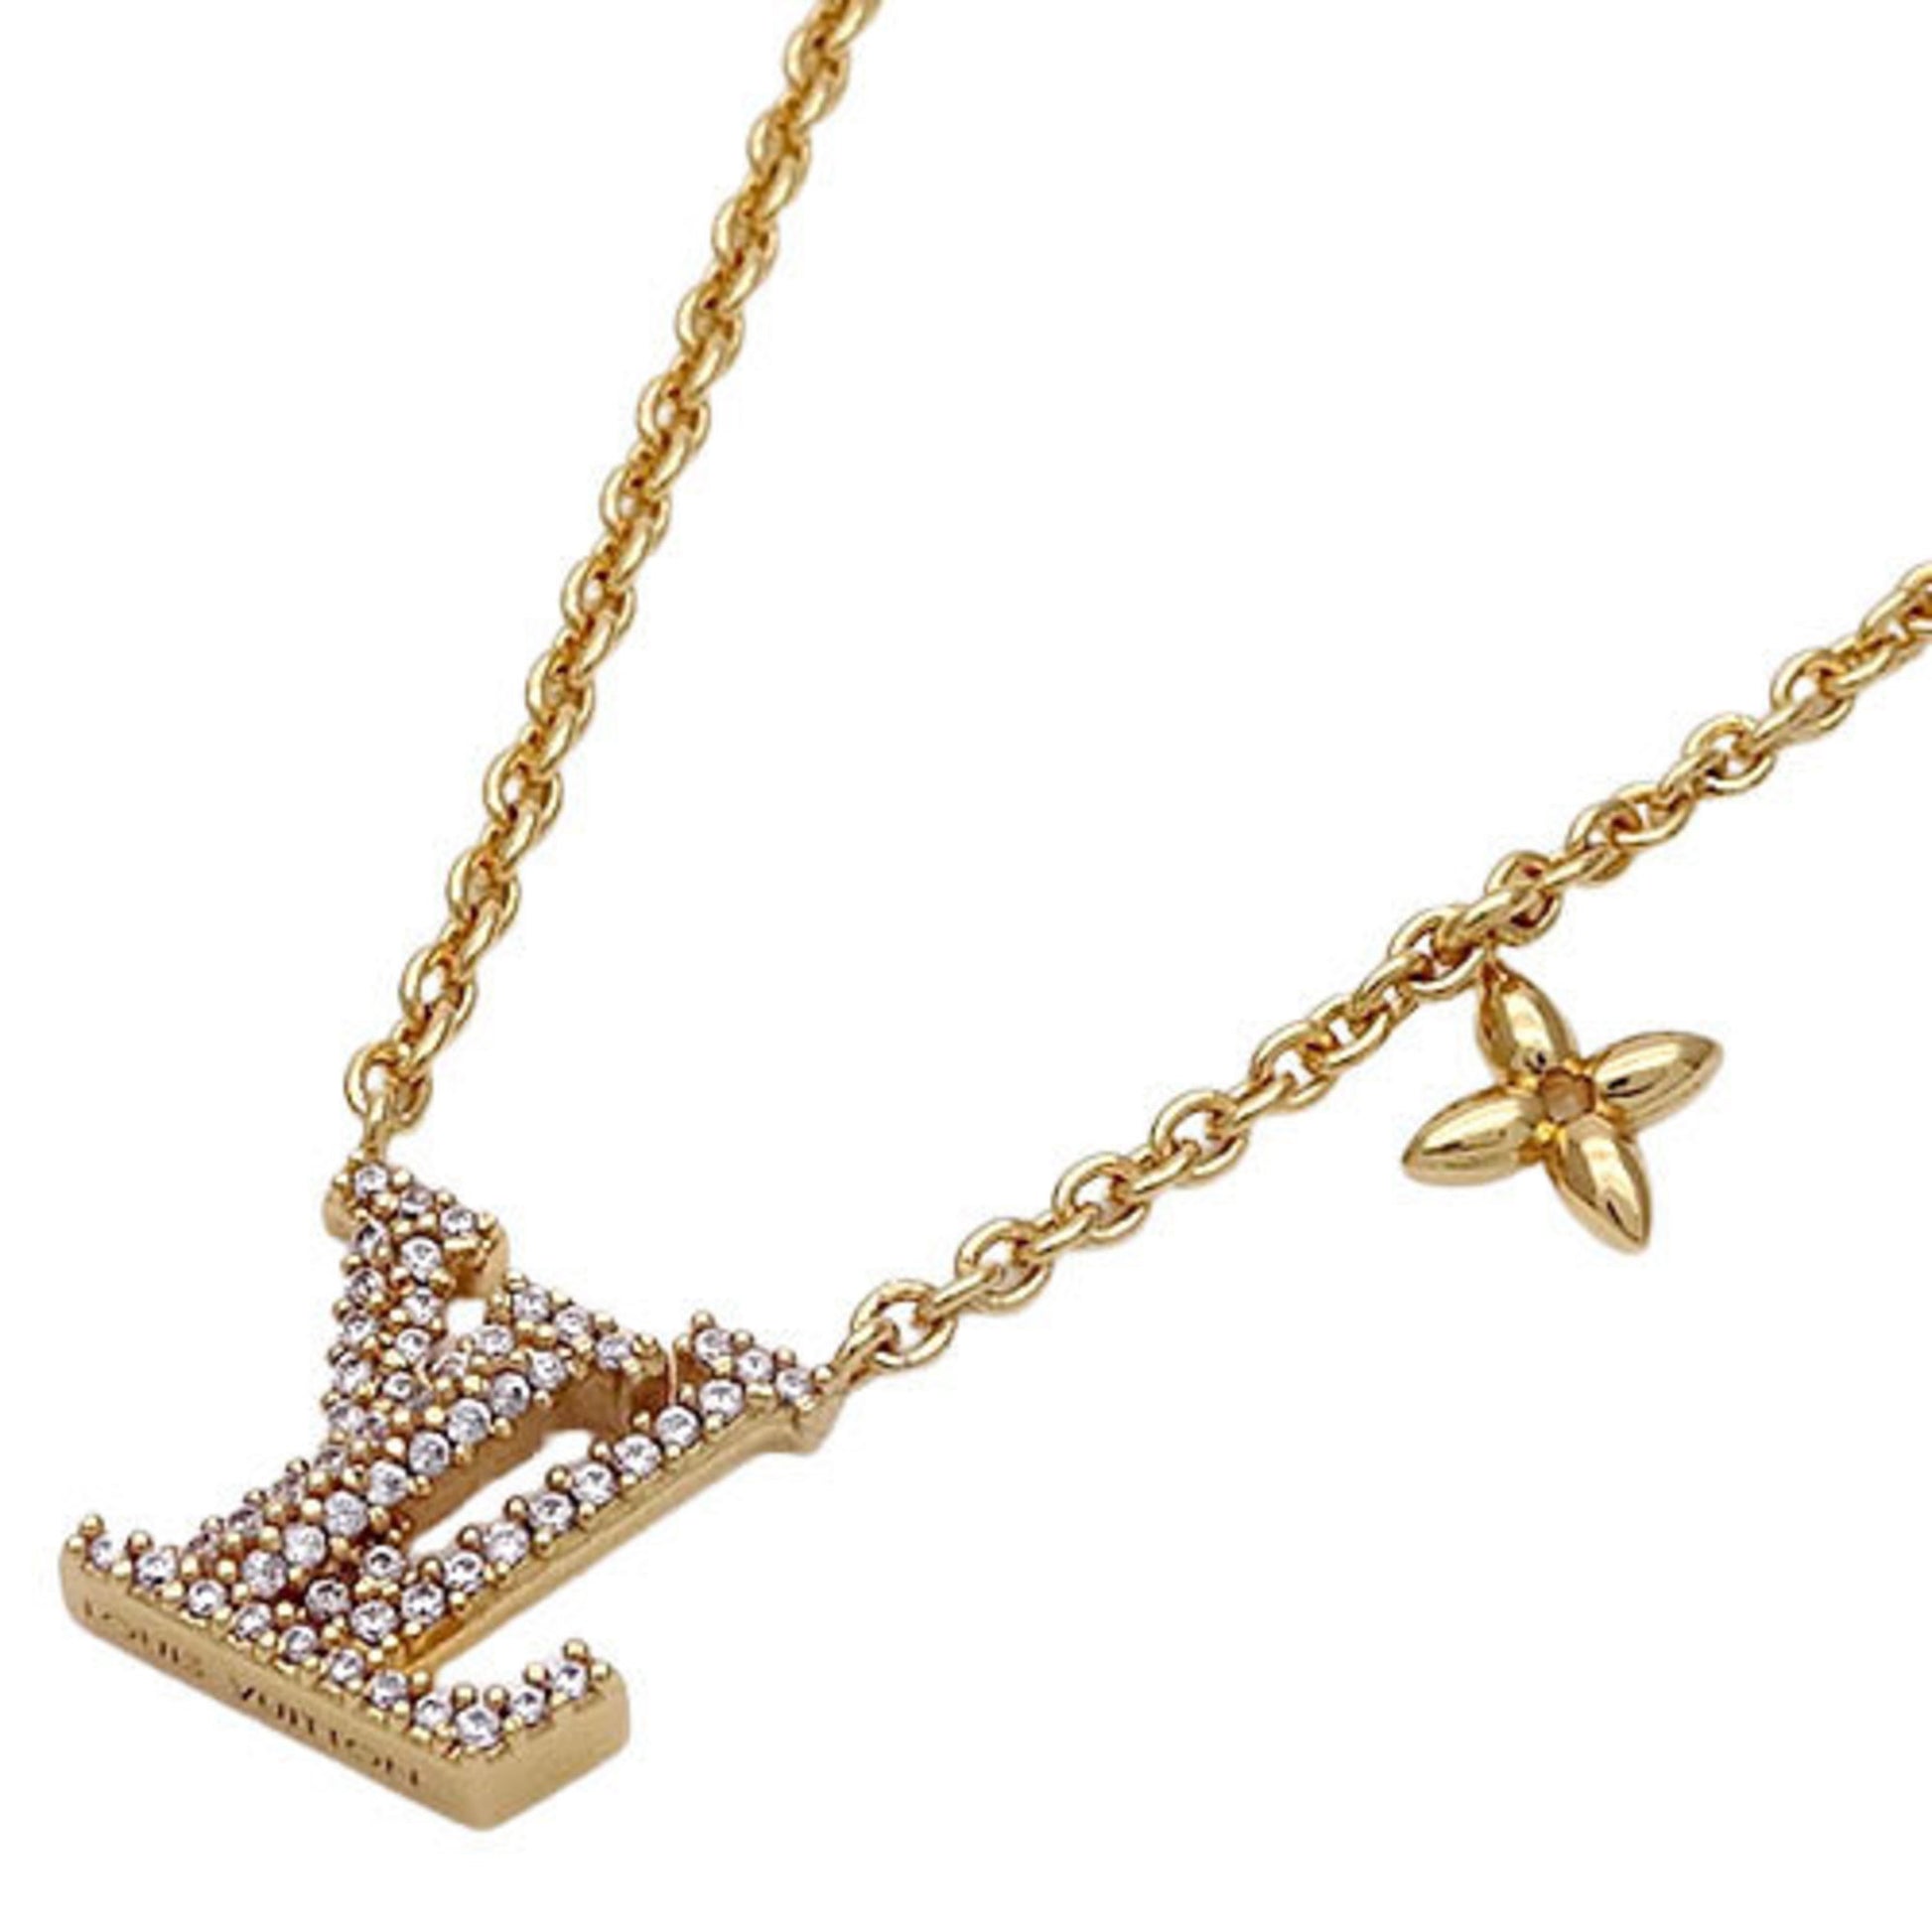 [Japan Used Necklace] Louis Vuitton Collier Lv Iconic/2021  /Necklace/Gld/With